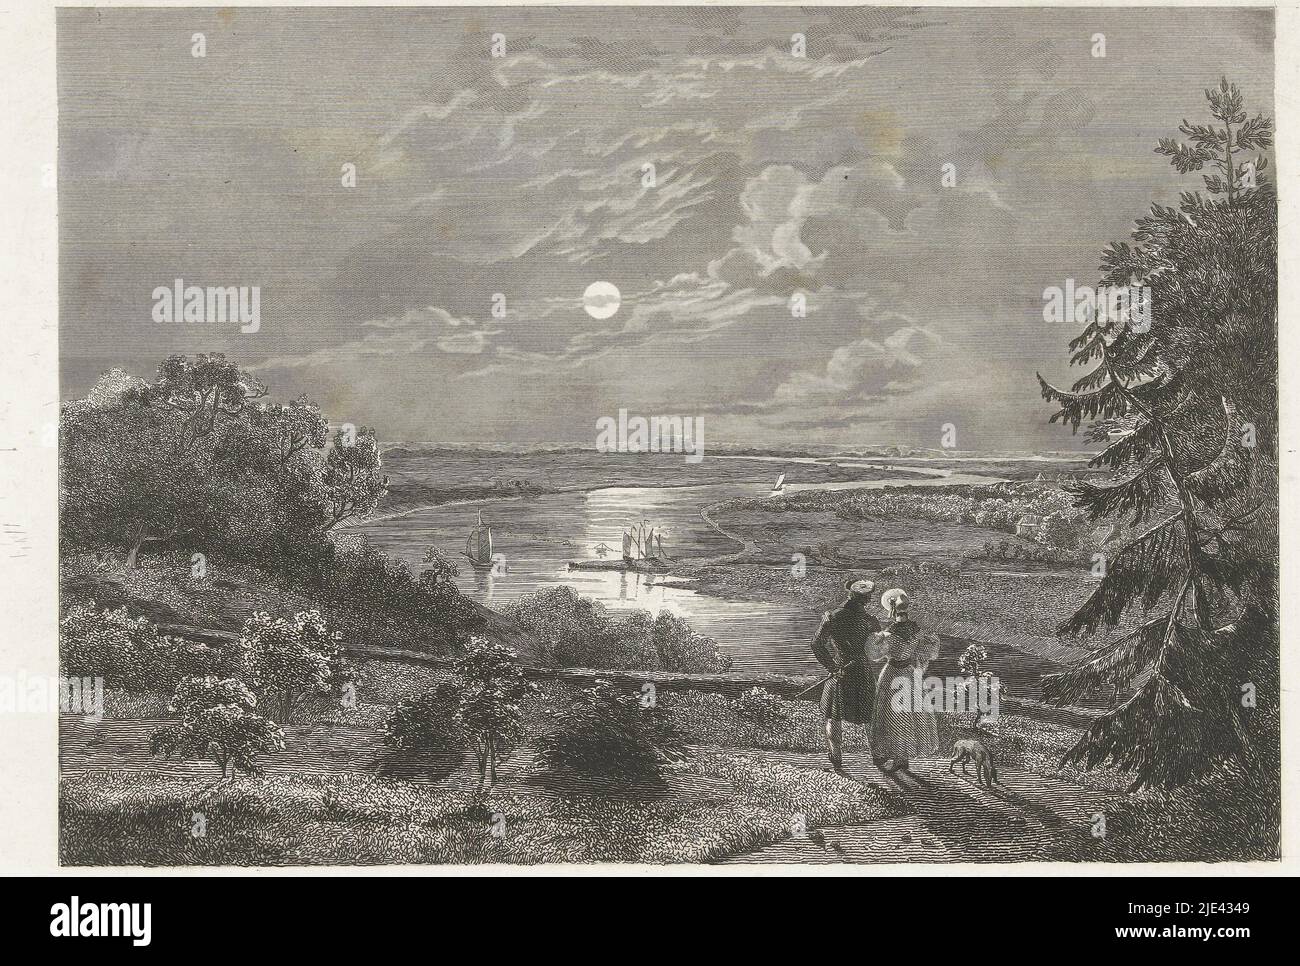 View of the Rhine and the Hunneschans near the village of Uddel by moonlight, Henricus Wilhelmus Couwenberg, after Abraham Johannes Couwenberg, 1838, print maker: Henricus Wilhelmus Couwenberg, (mentioned on object), intermediary draughtsman: Abraham Johannes Couwenberg, (mentioned on object), 1838, paper, steel engraving, h 250 mm × w 300 mm Stock Photo